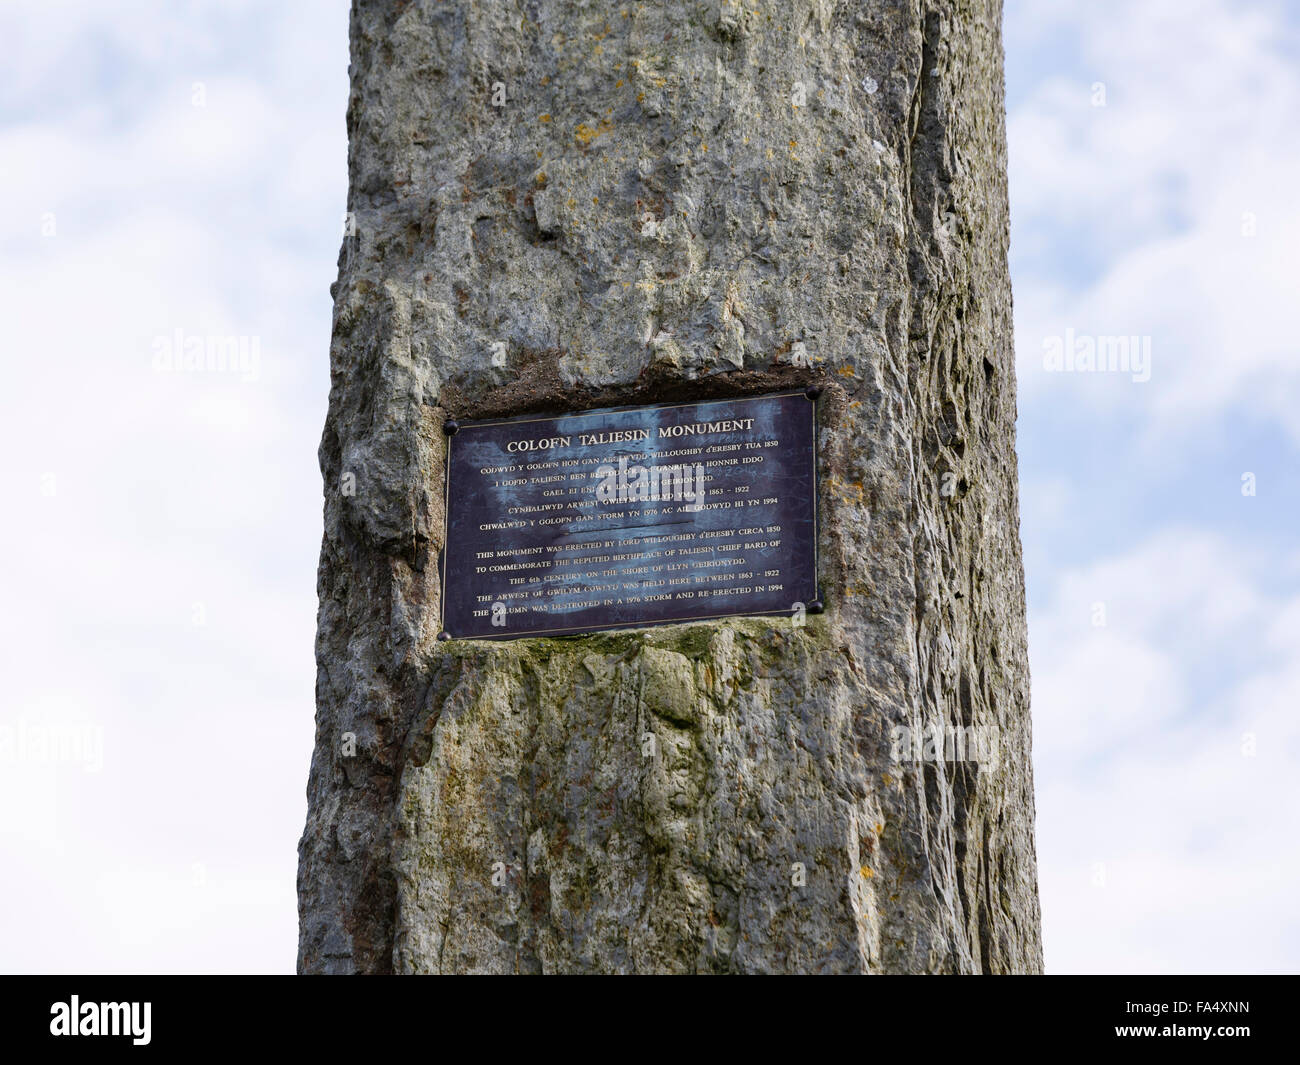 Bilingual sign in Welsh and English on Colofn Taliesin Monument column. Llyn Geirionydd in Snowdonia National Park. Wales UK Stock Photo